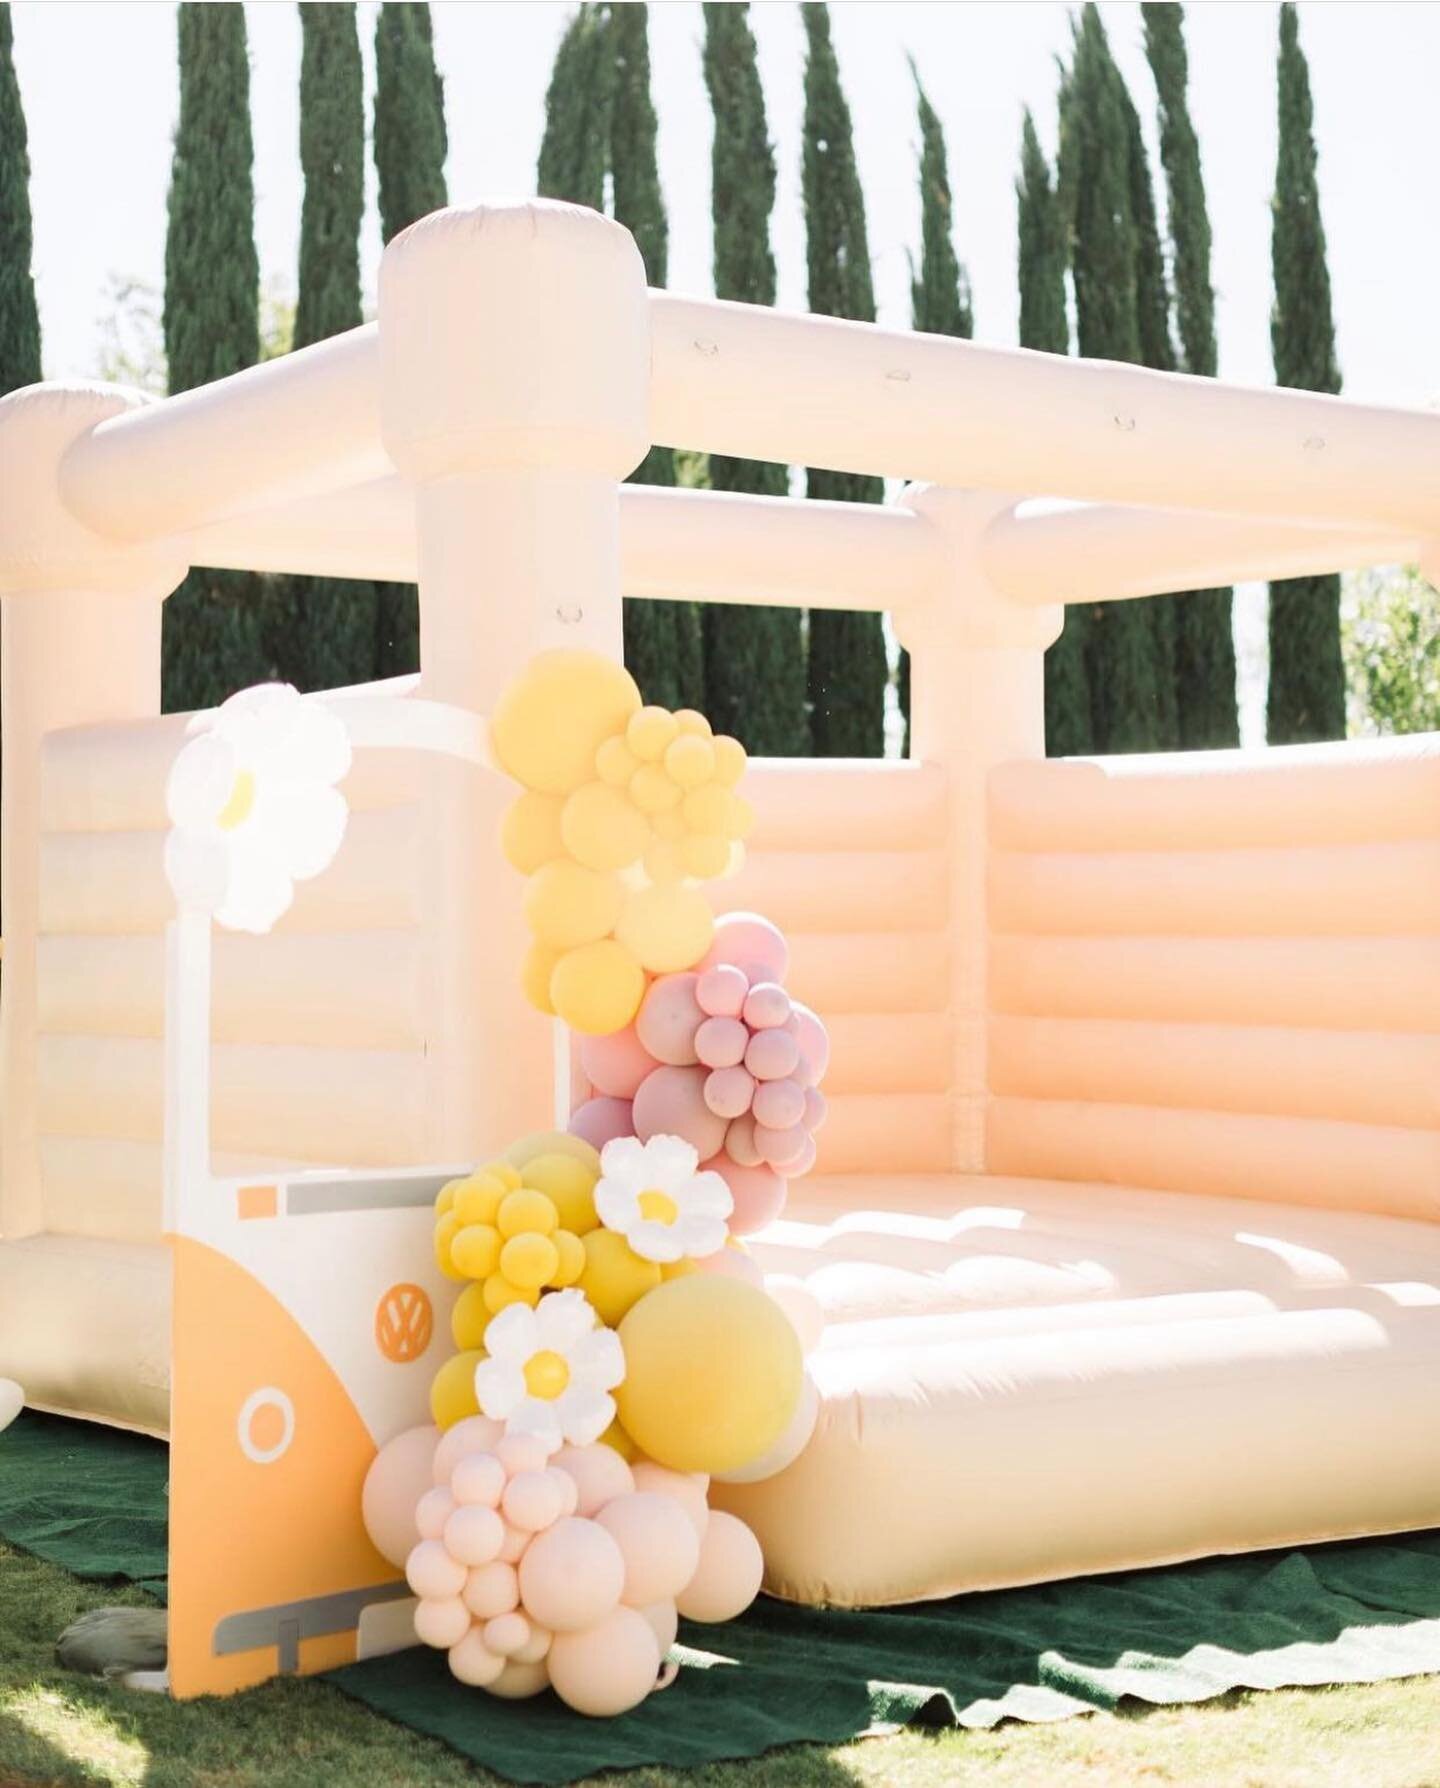 Our Sunshine Bouncer ☀️☀️at baby Keira&rsquo;s 1st Birthday! 🌼🌼
@mydreambackdropsandmore made it Look super cute!

&amp; thanks to @__jessnoel__  for booking us! 

#tanbouncer #firstbirthday #1stbirthday #sunshine #whitebouncerrentallosangeles #whi